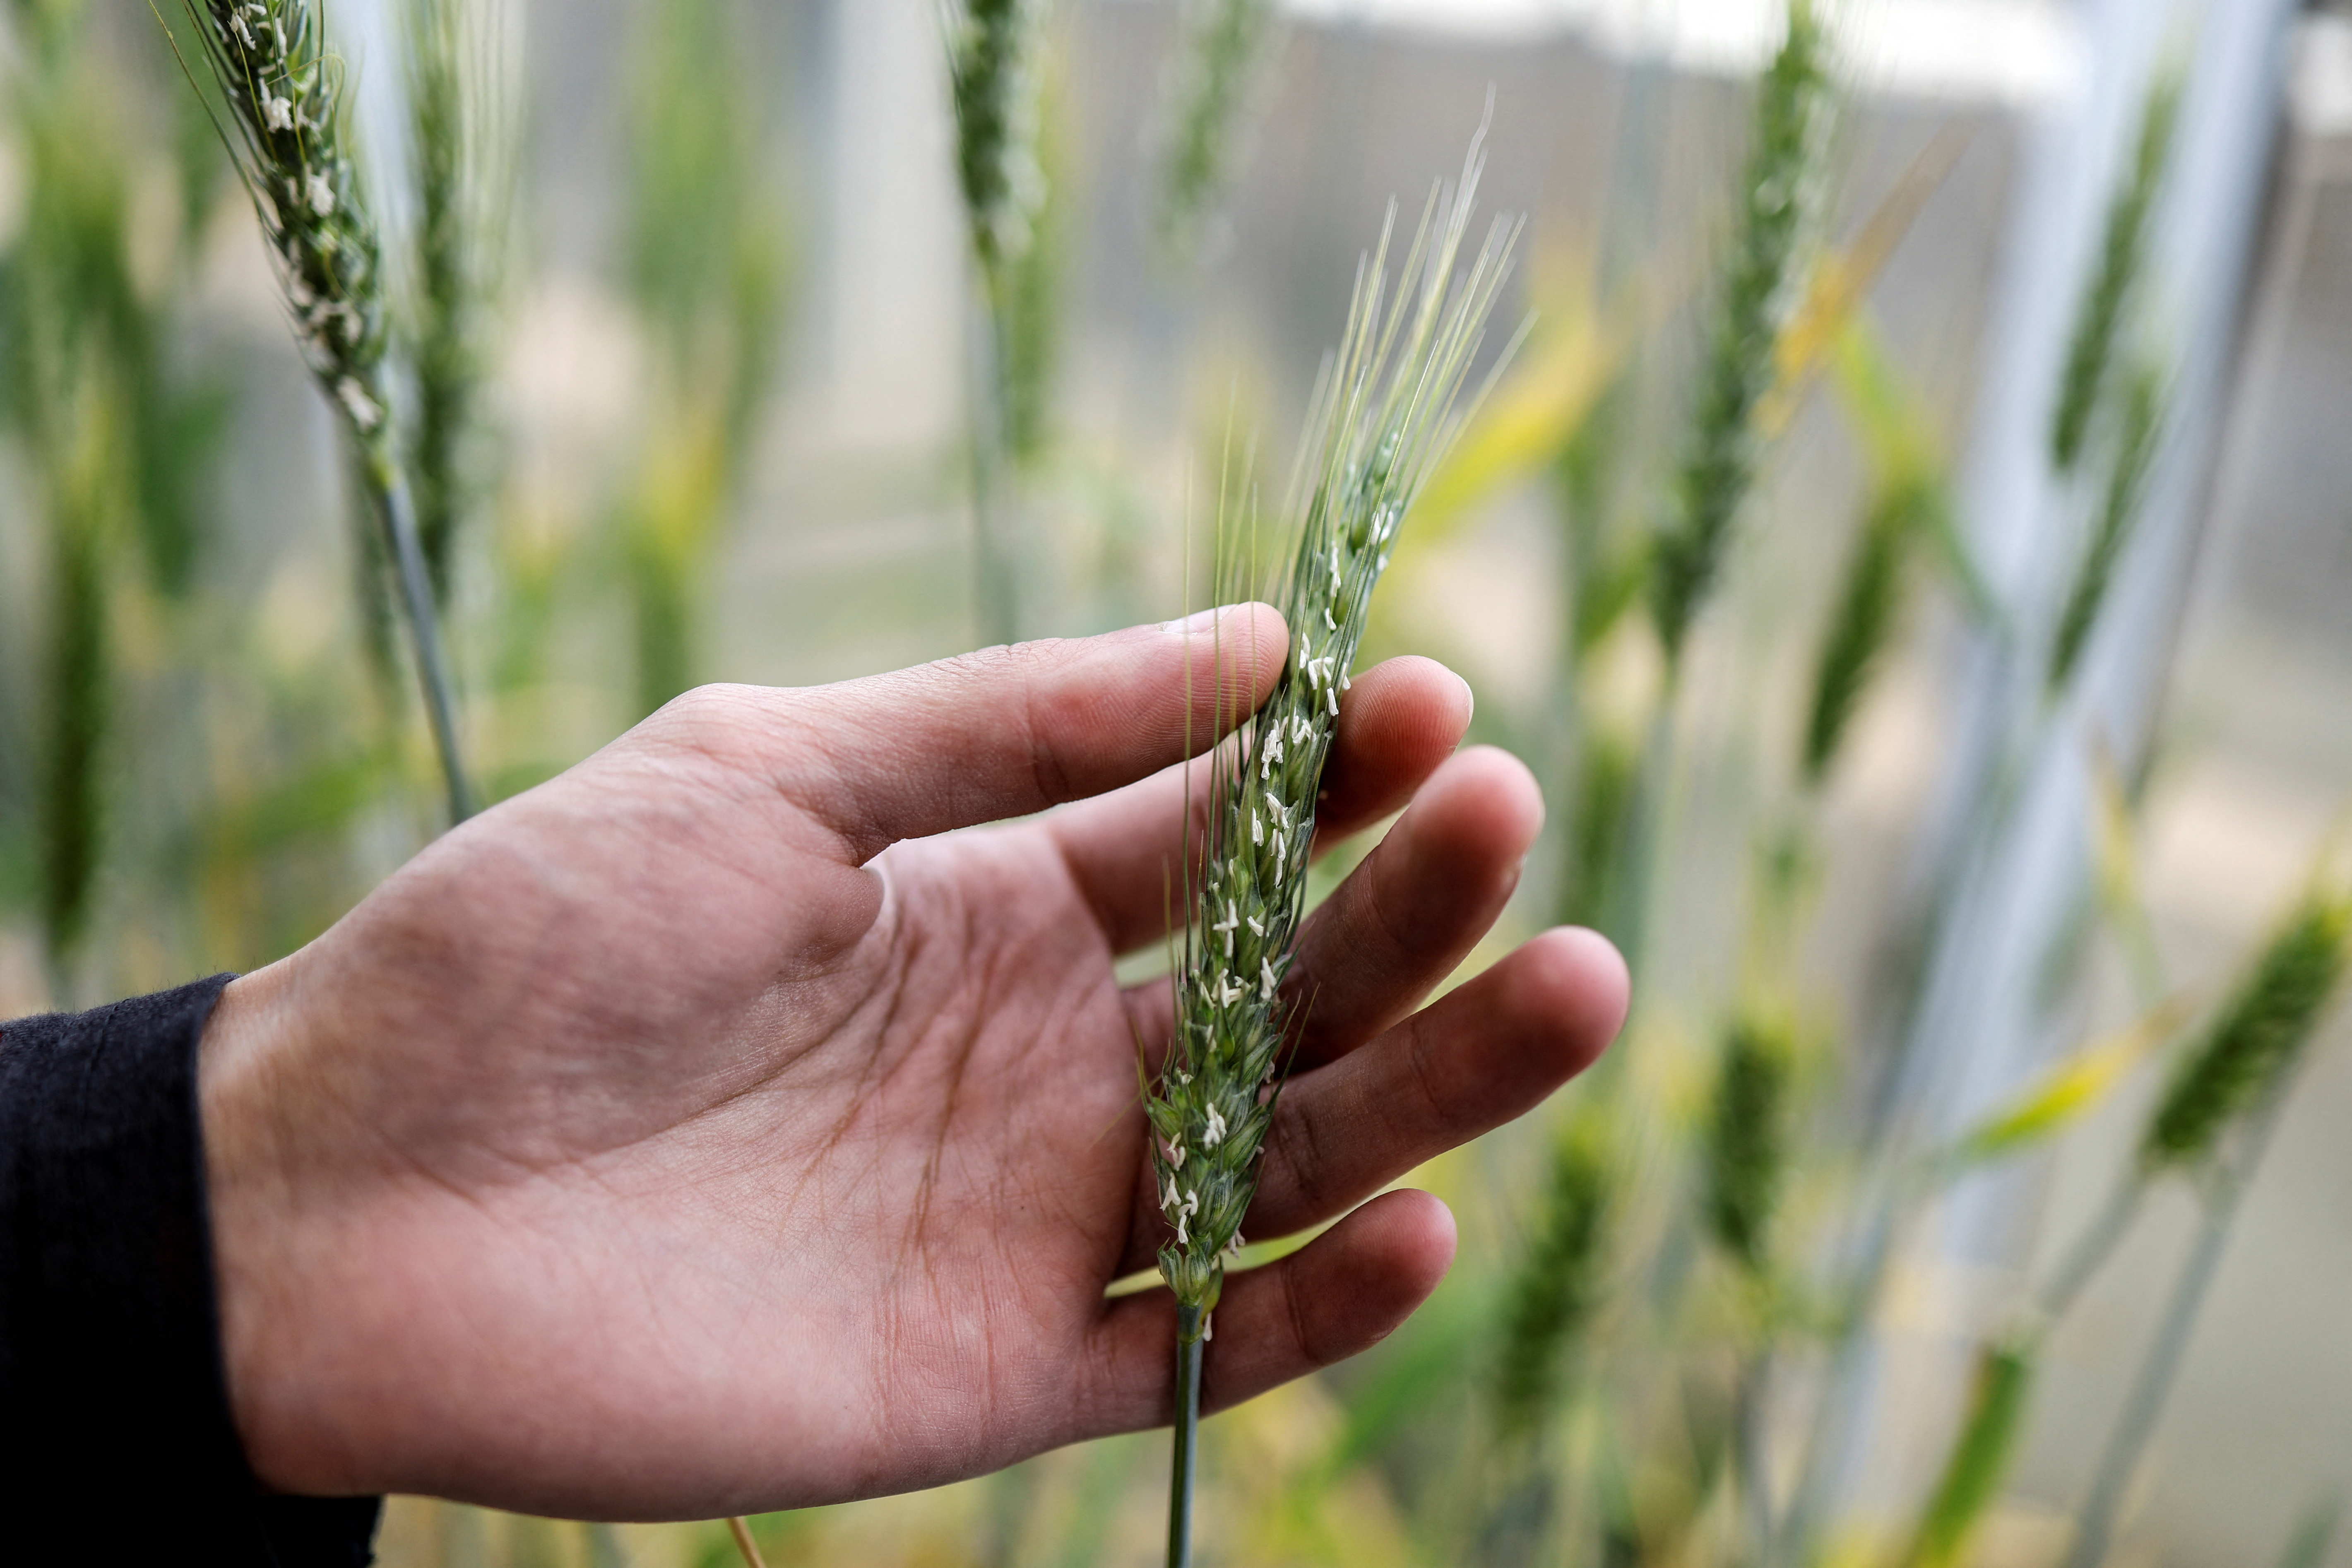 A man handles an ear of wheat in a greenhouse at the Israel Plant Gene Bank at the Volcani Institute in Rishon LeZion